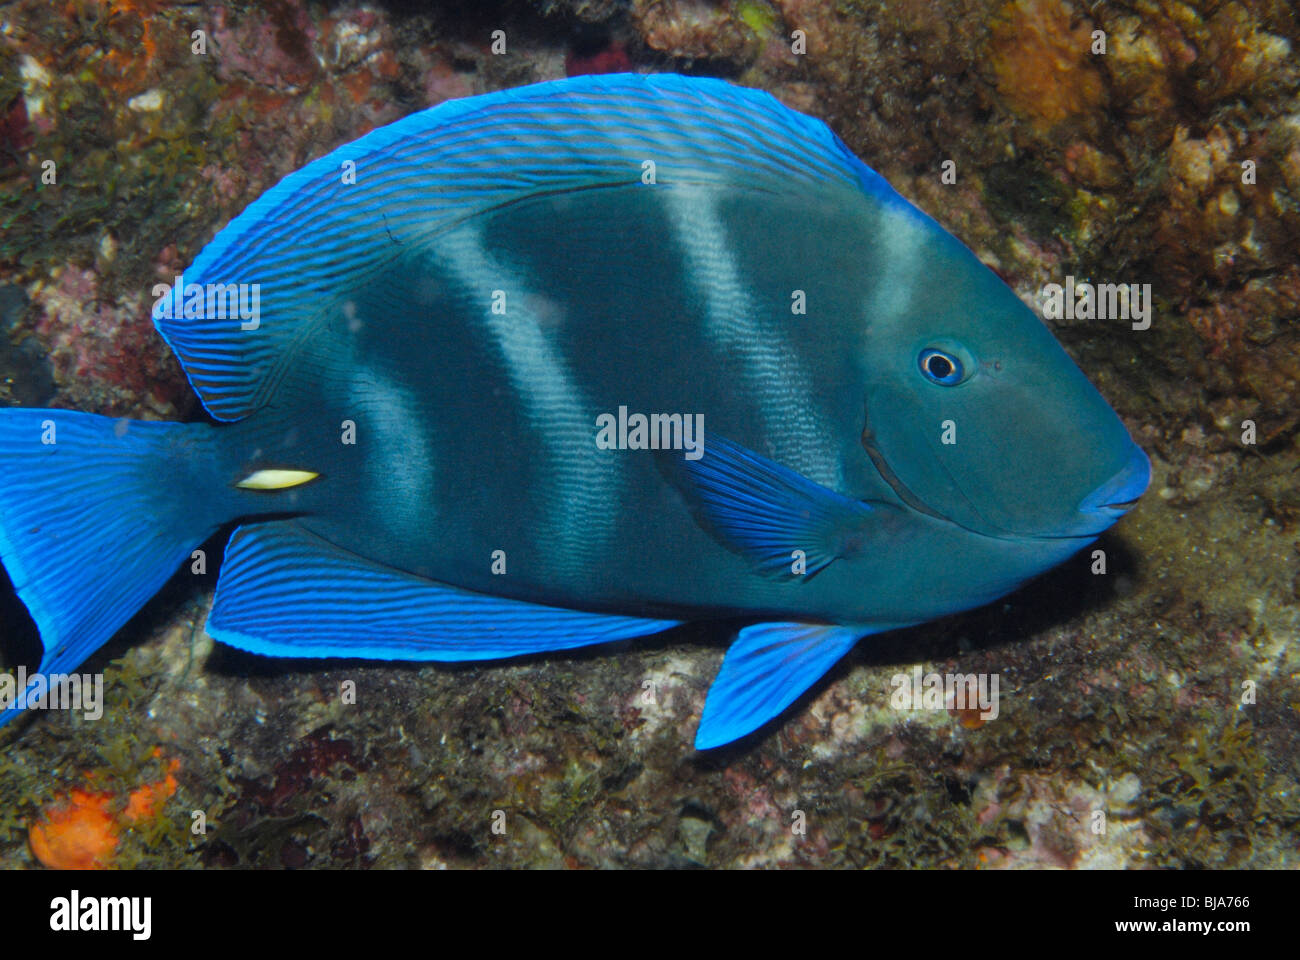 Blue tang surgeonfish in the Gulf of Mexico. Stock Photo